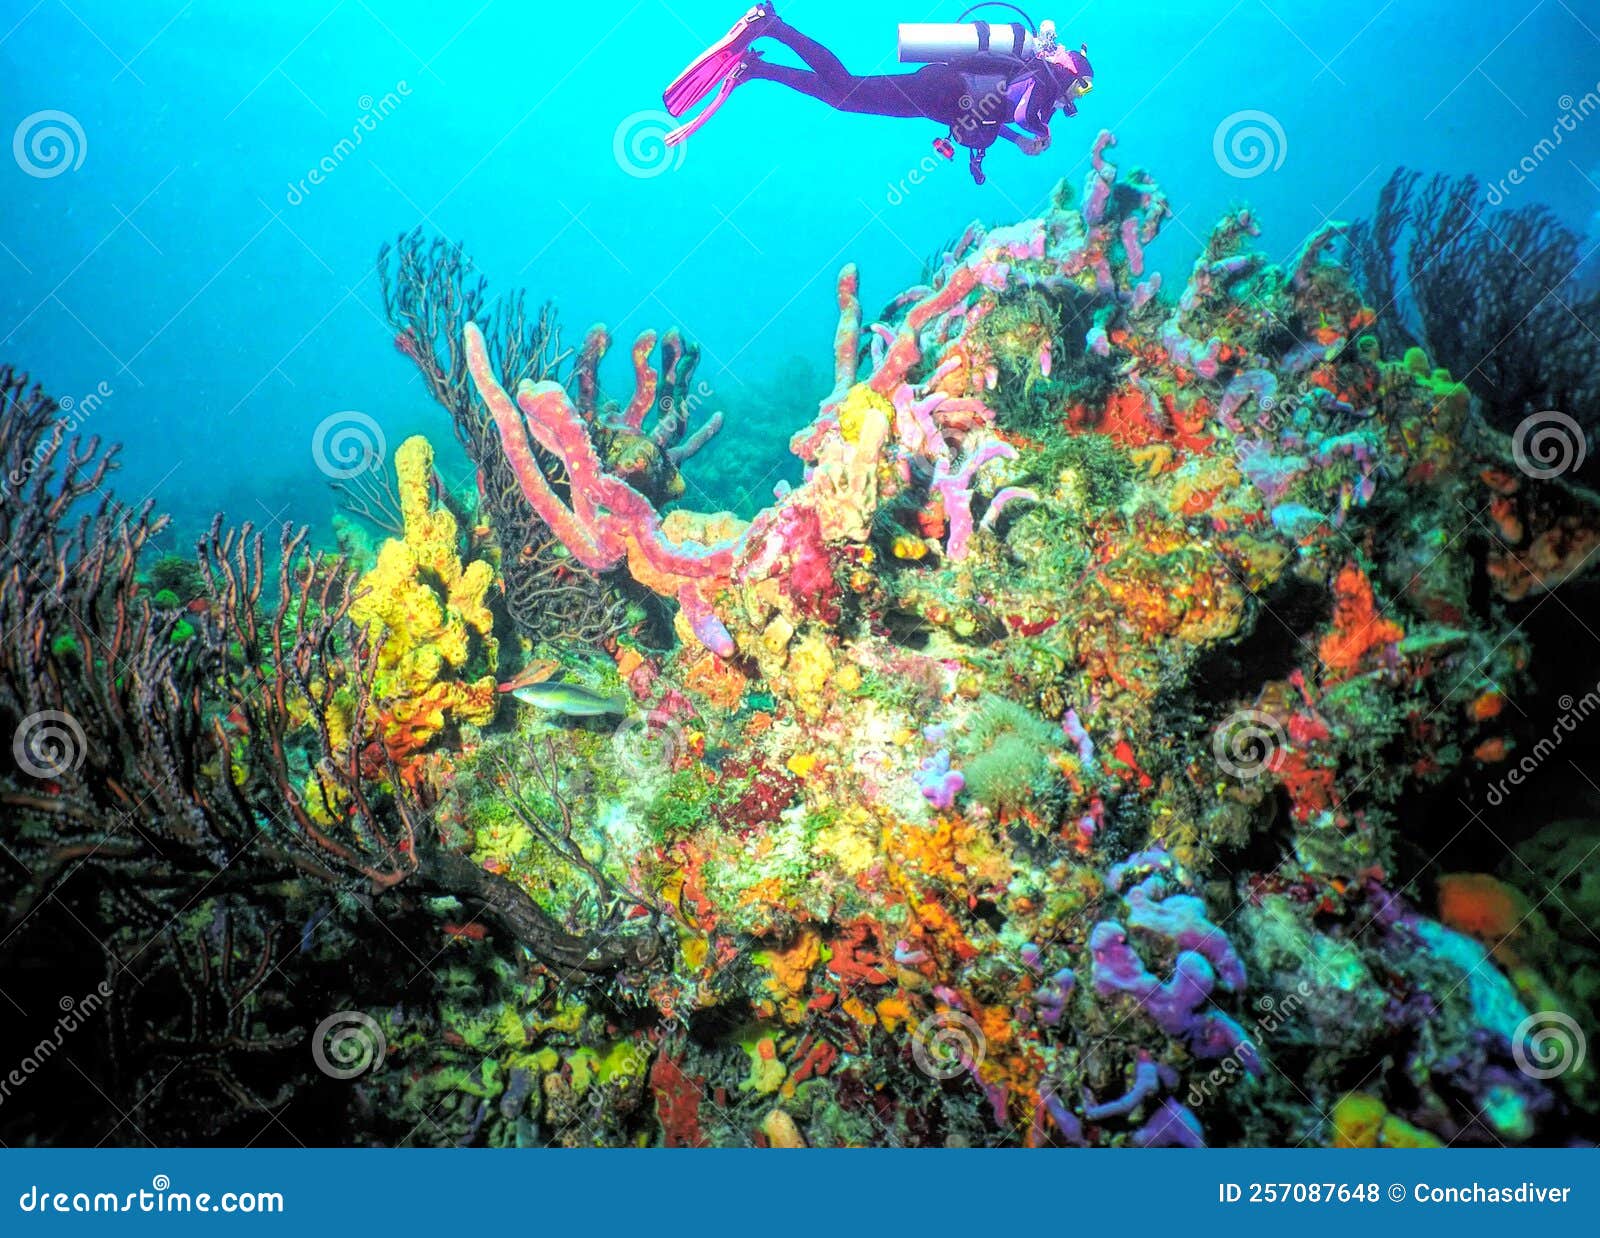 a diver enjoys the colorful reef life off the island of tobago